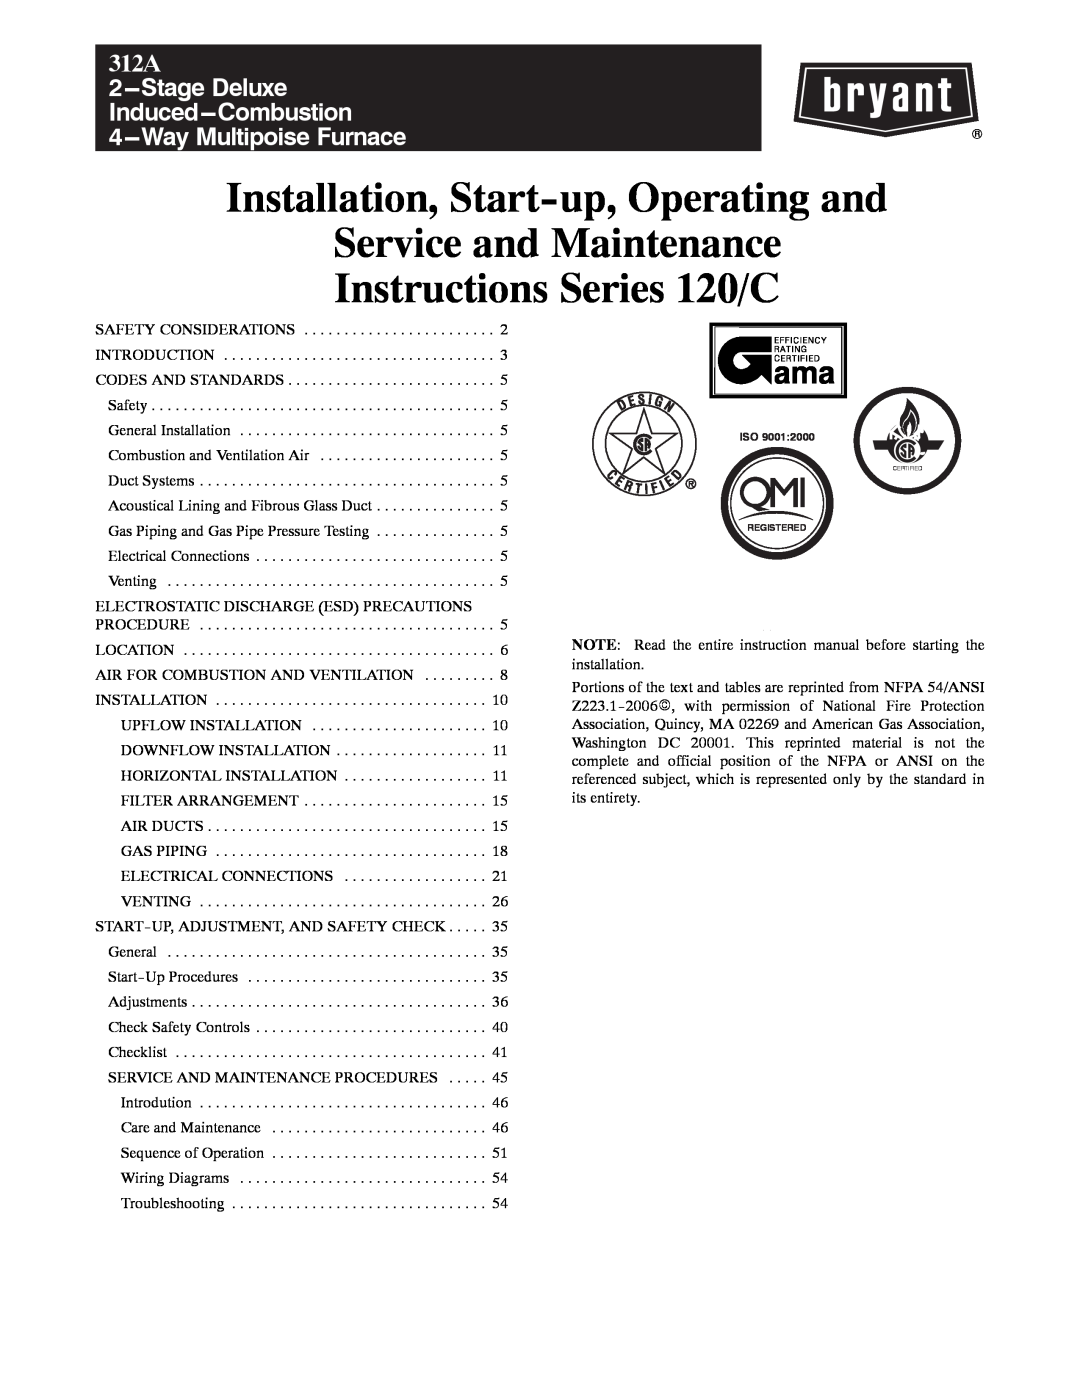 Bryant instruction manual Installation, Start-up,Operating and, Service and Maintenance Instructions Series 120/C, 312A 